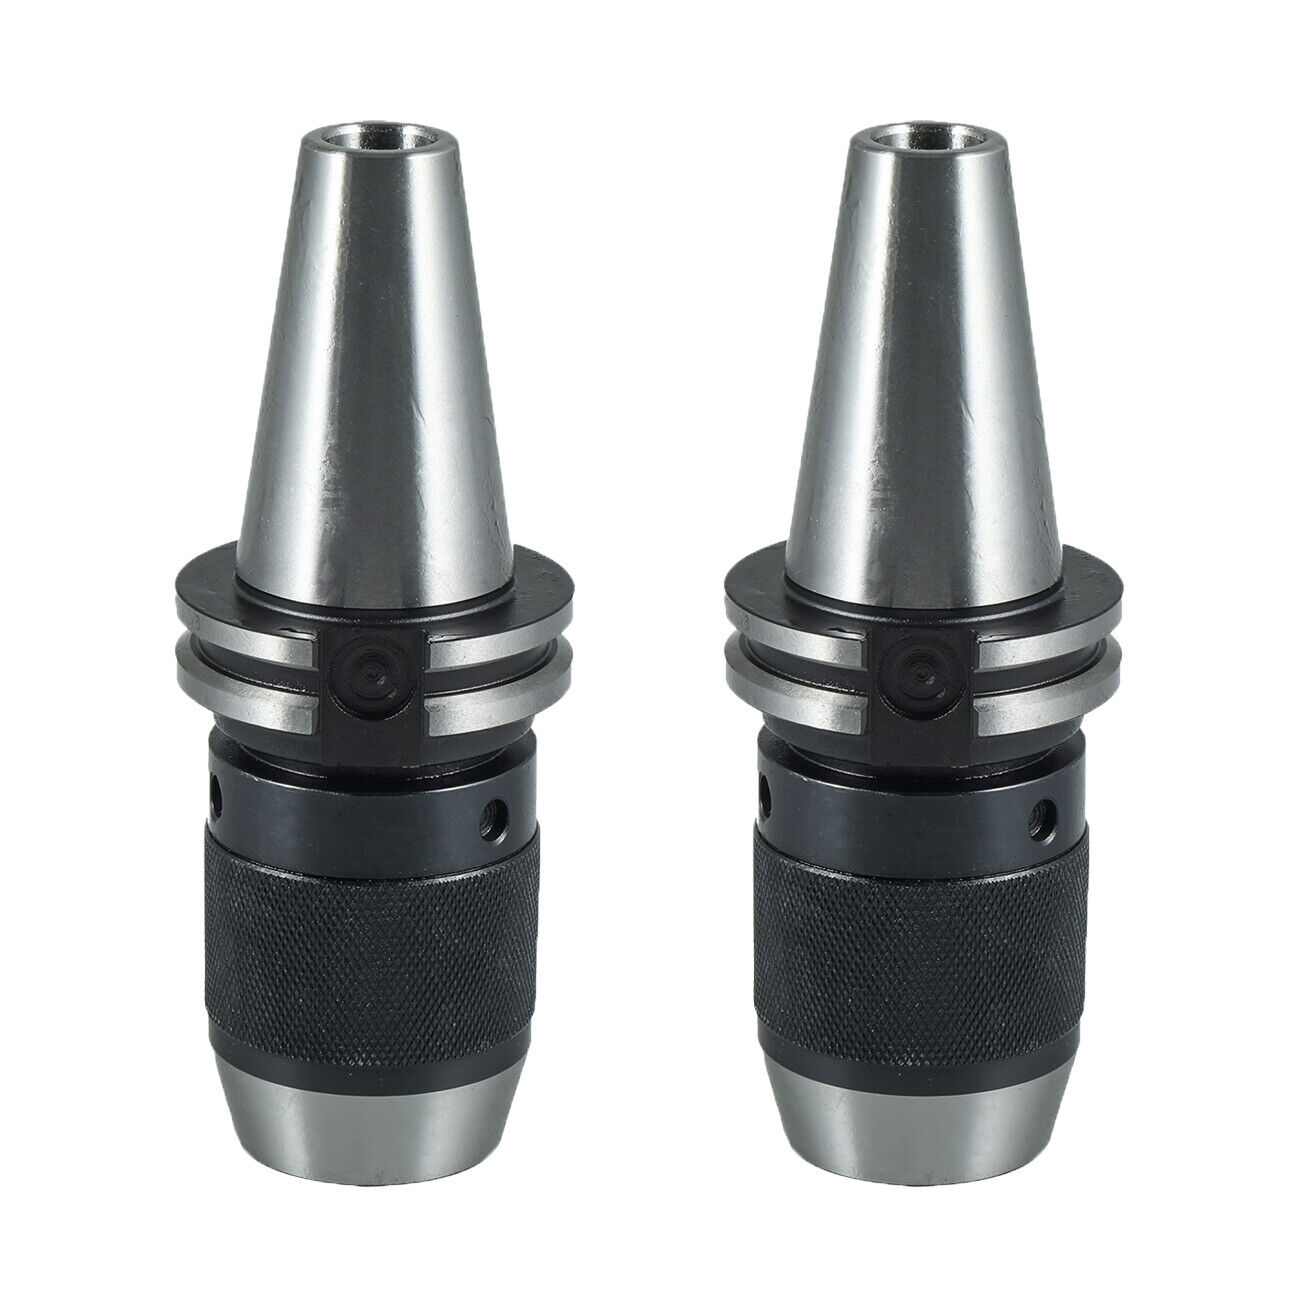 2pcs CAT40 Collet Chuck CNC Keyless Drill Chuck 5/8'' For HAAS CAT40 APU16 Unbranded Does not apply